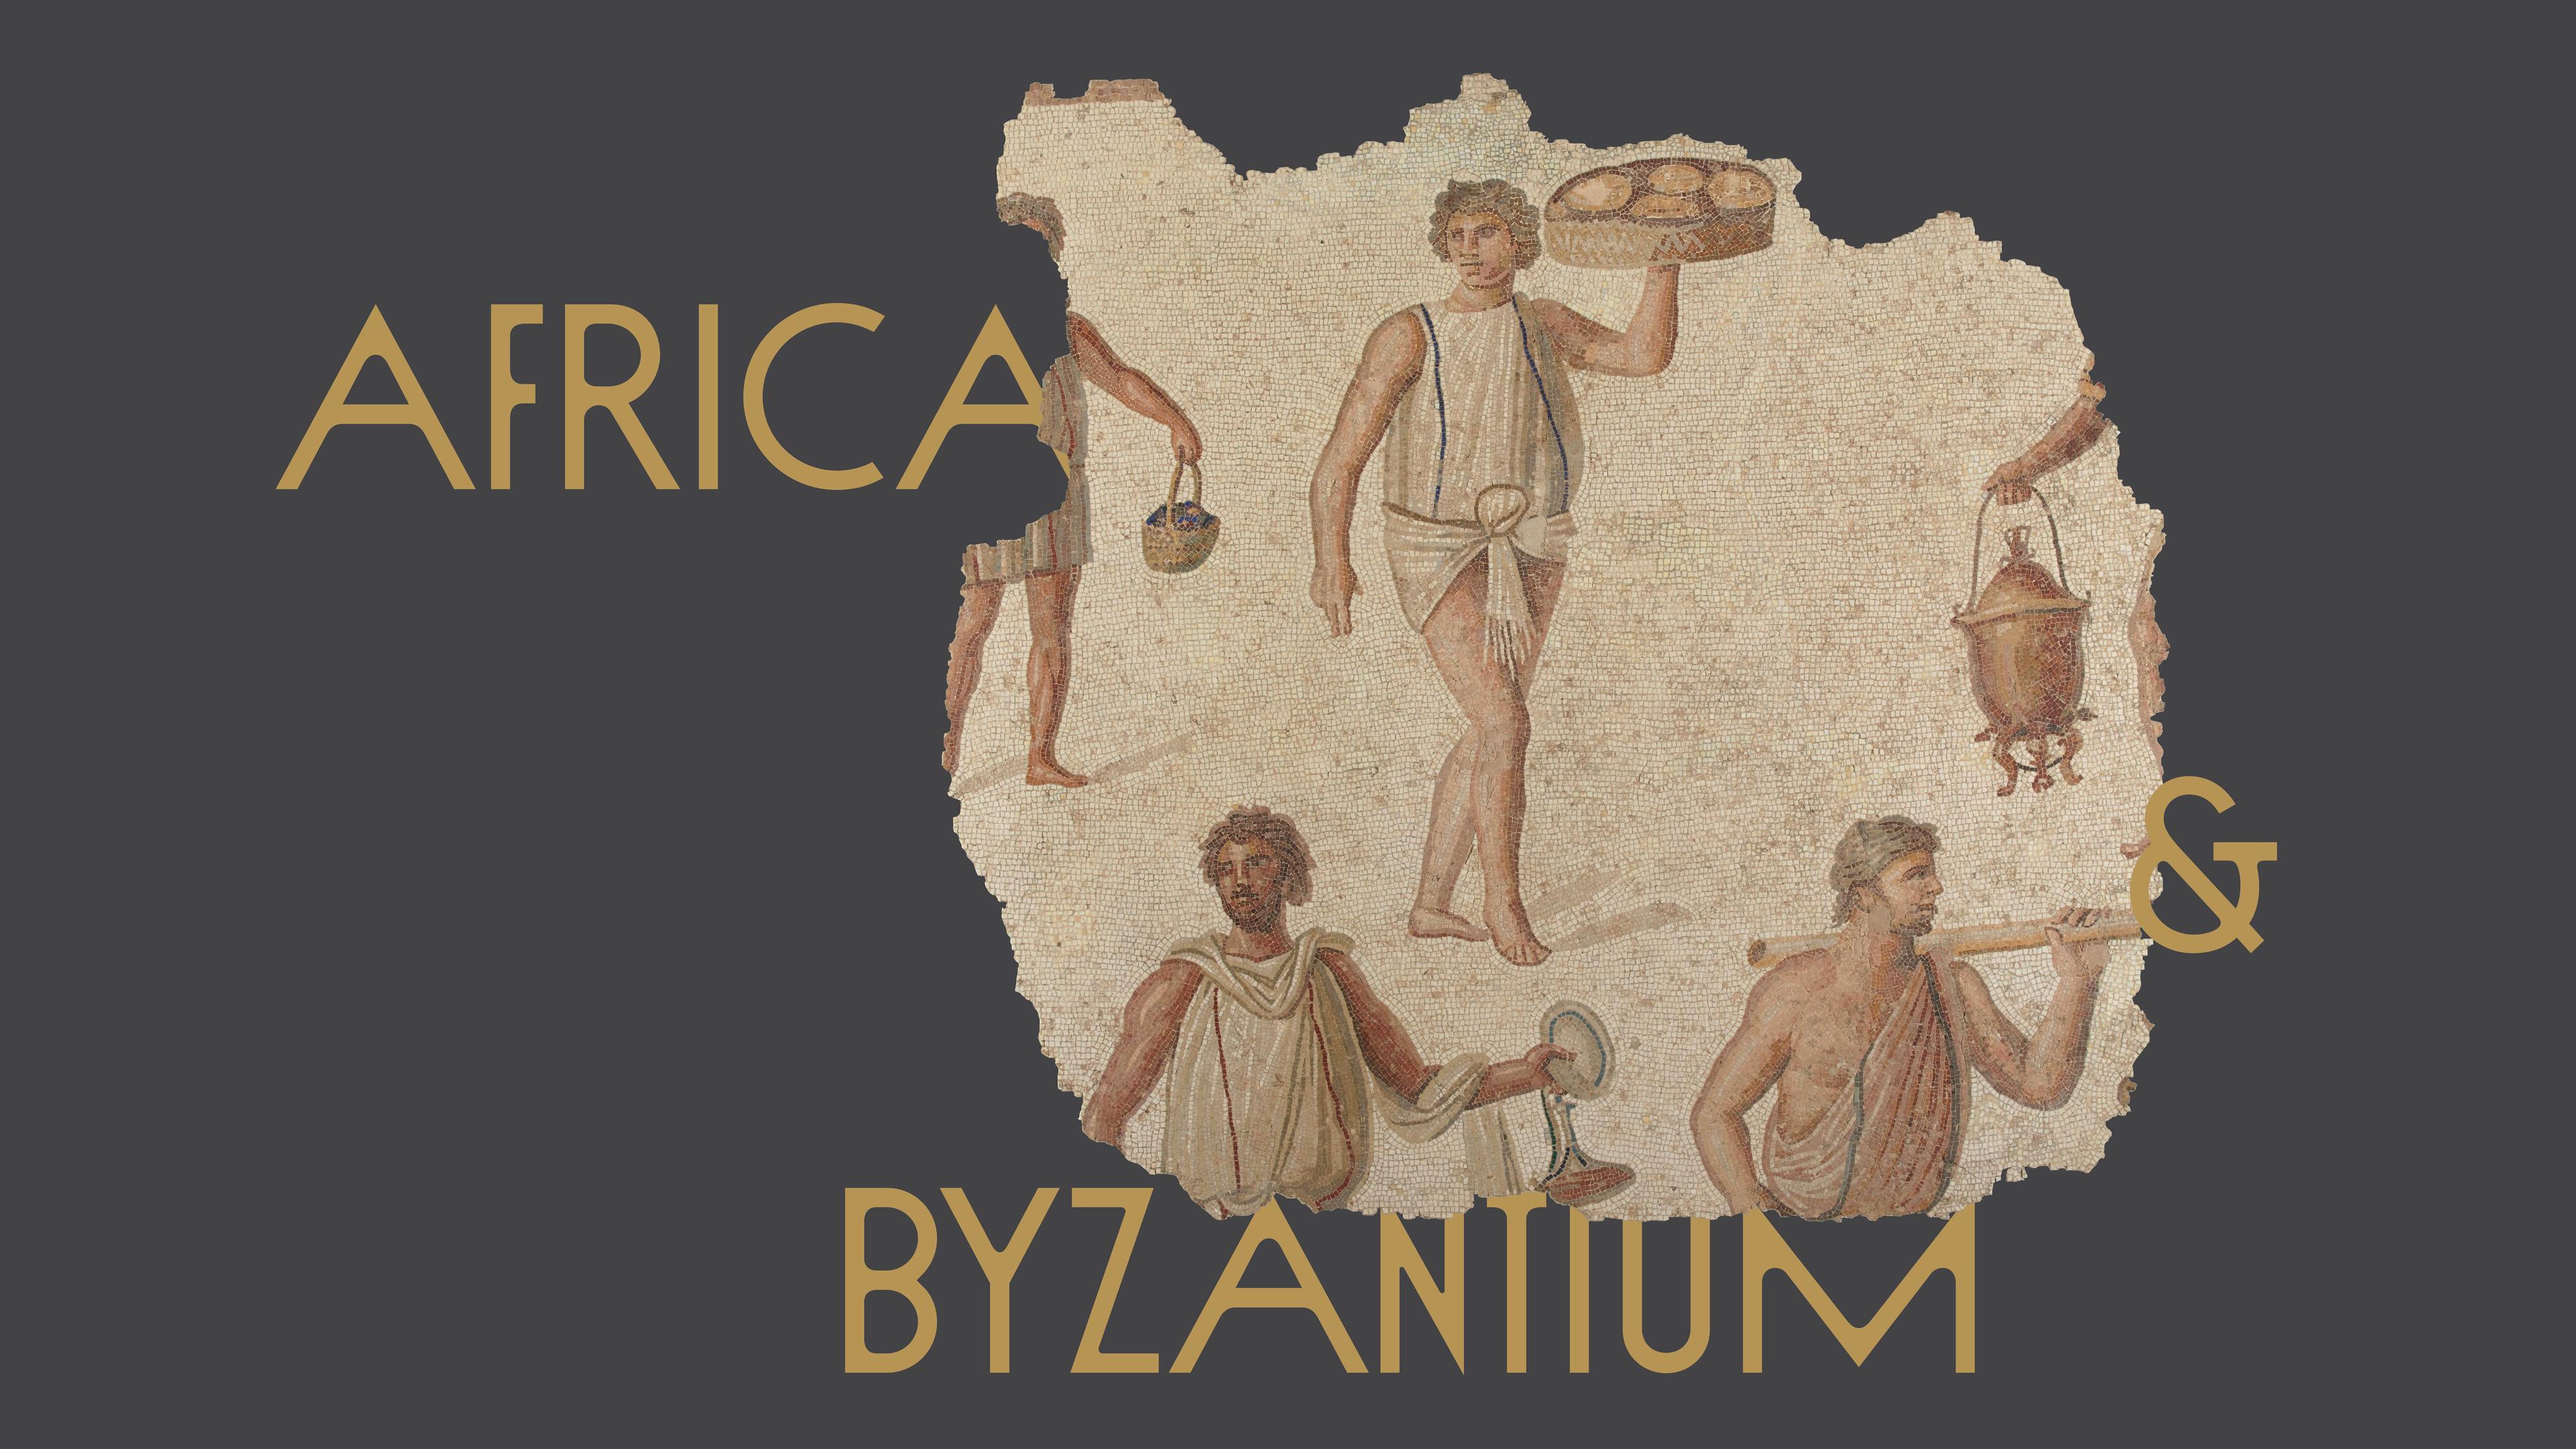 Mosaic in the shape of a map with a title in yellow that reads "Africa & Byzantium"